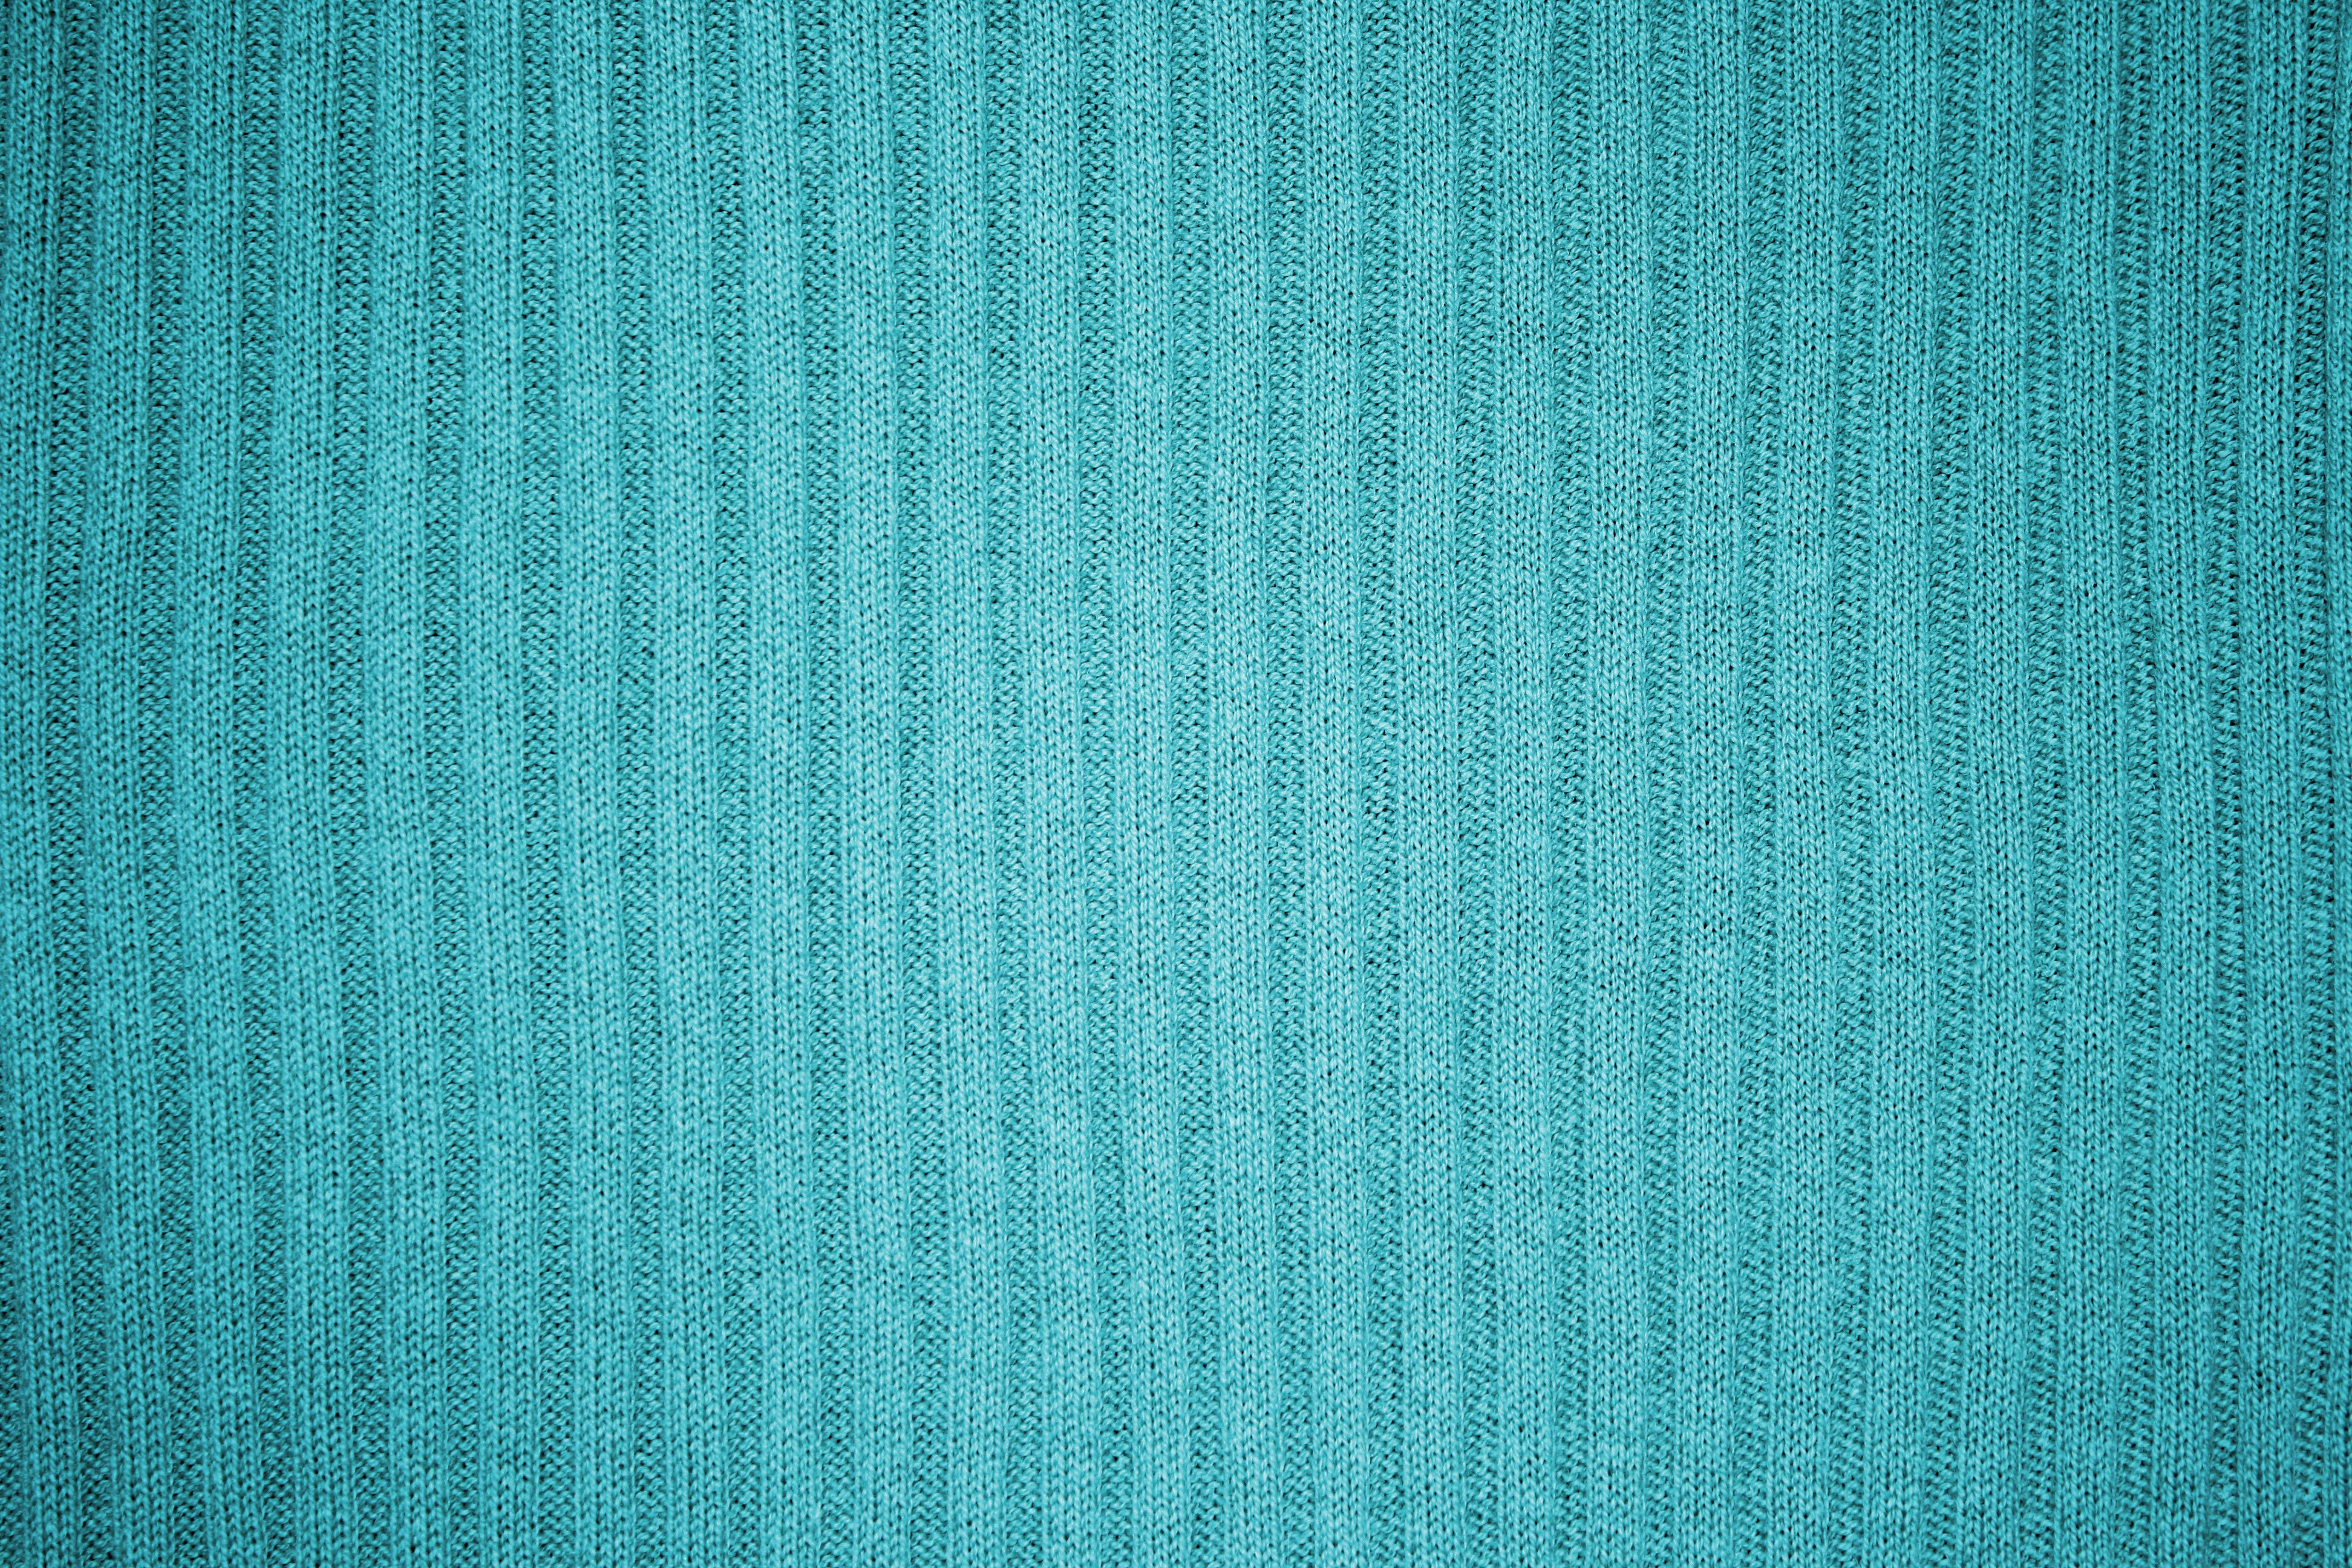 Turquoise Ribbed Knit Fabric Texture Picture Graph Wallpaper